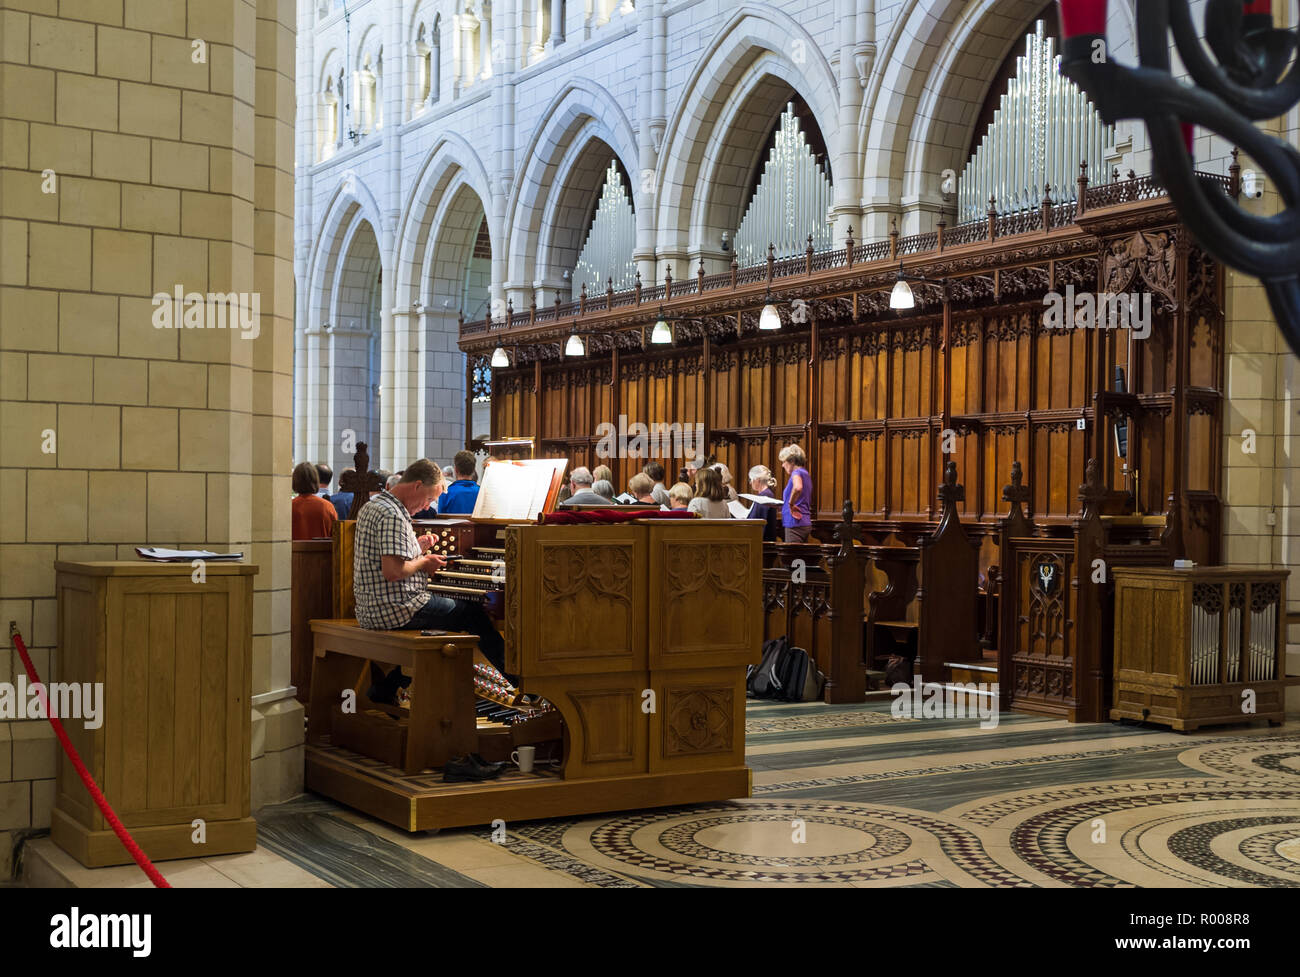 Organist sitting at an Abbey organ looking at his mobile phone choir in the background. Stock Photo